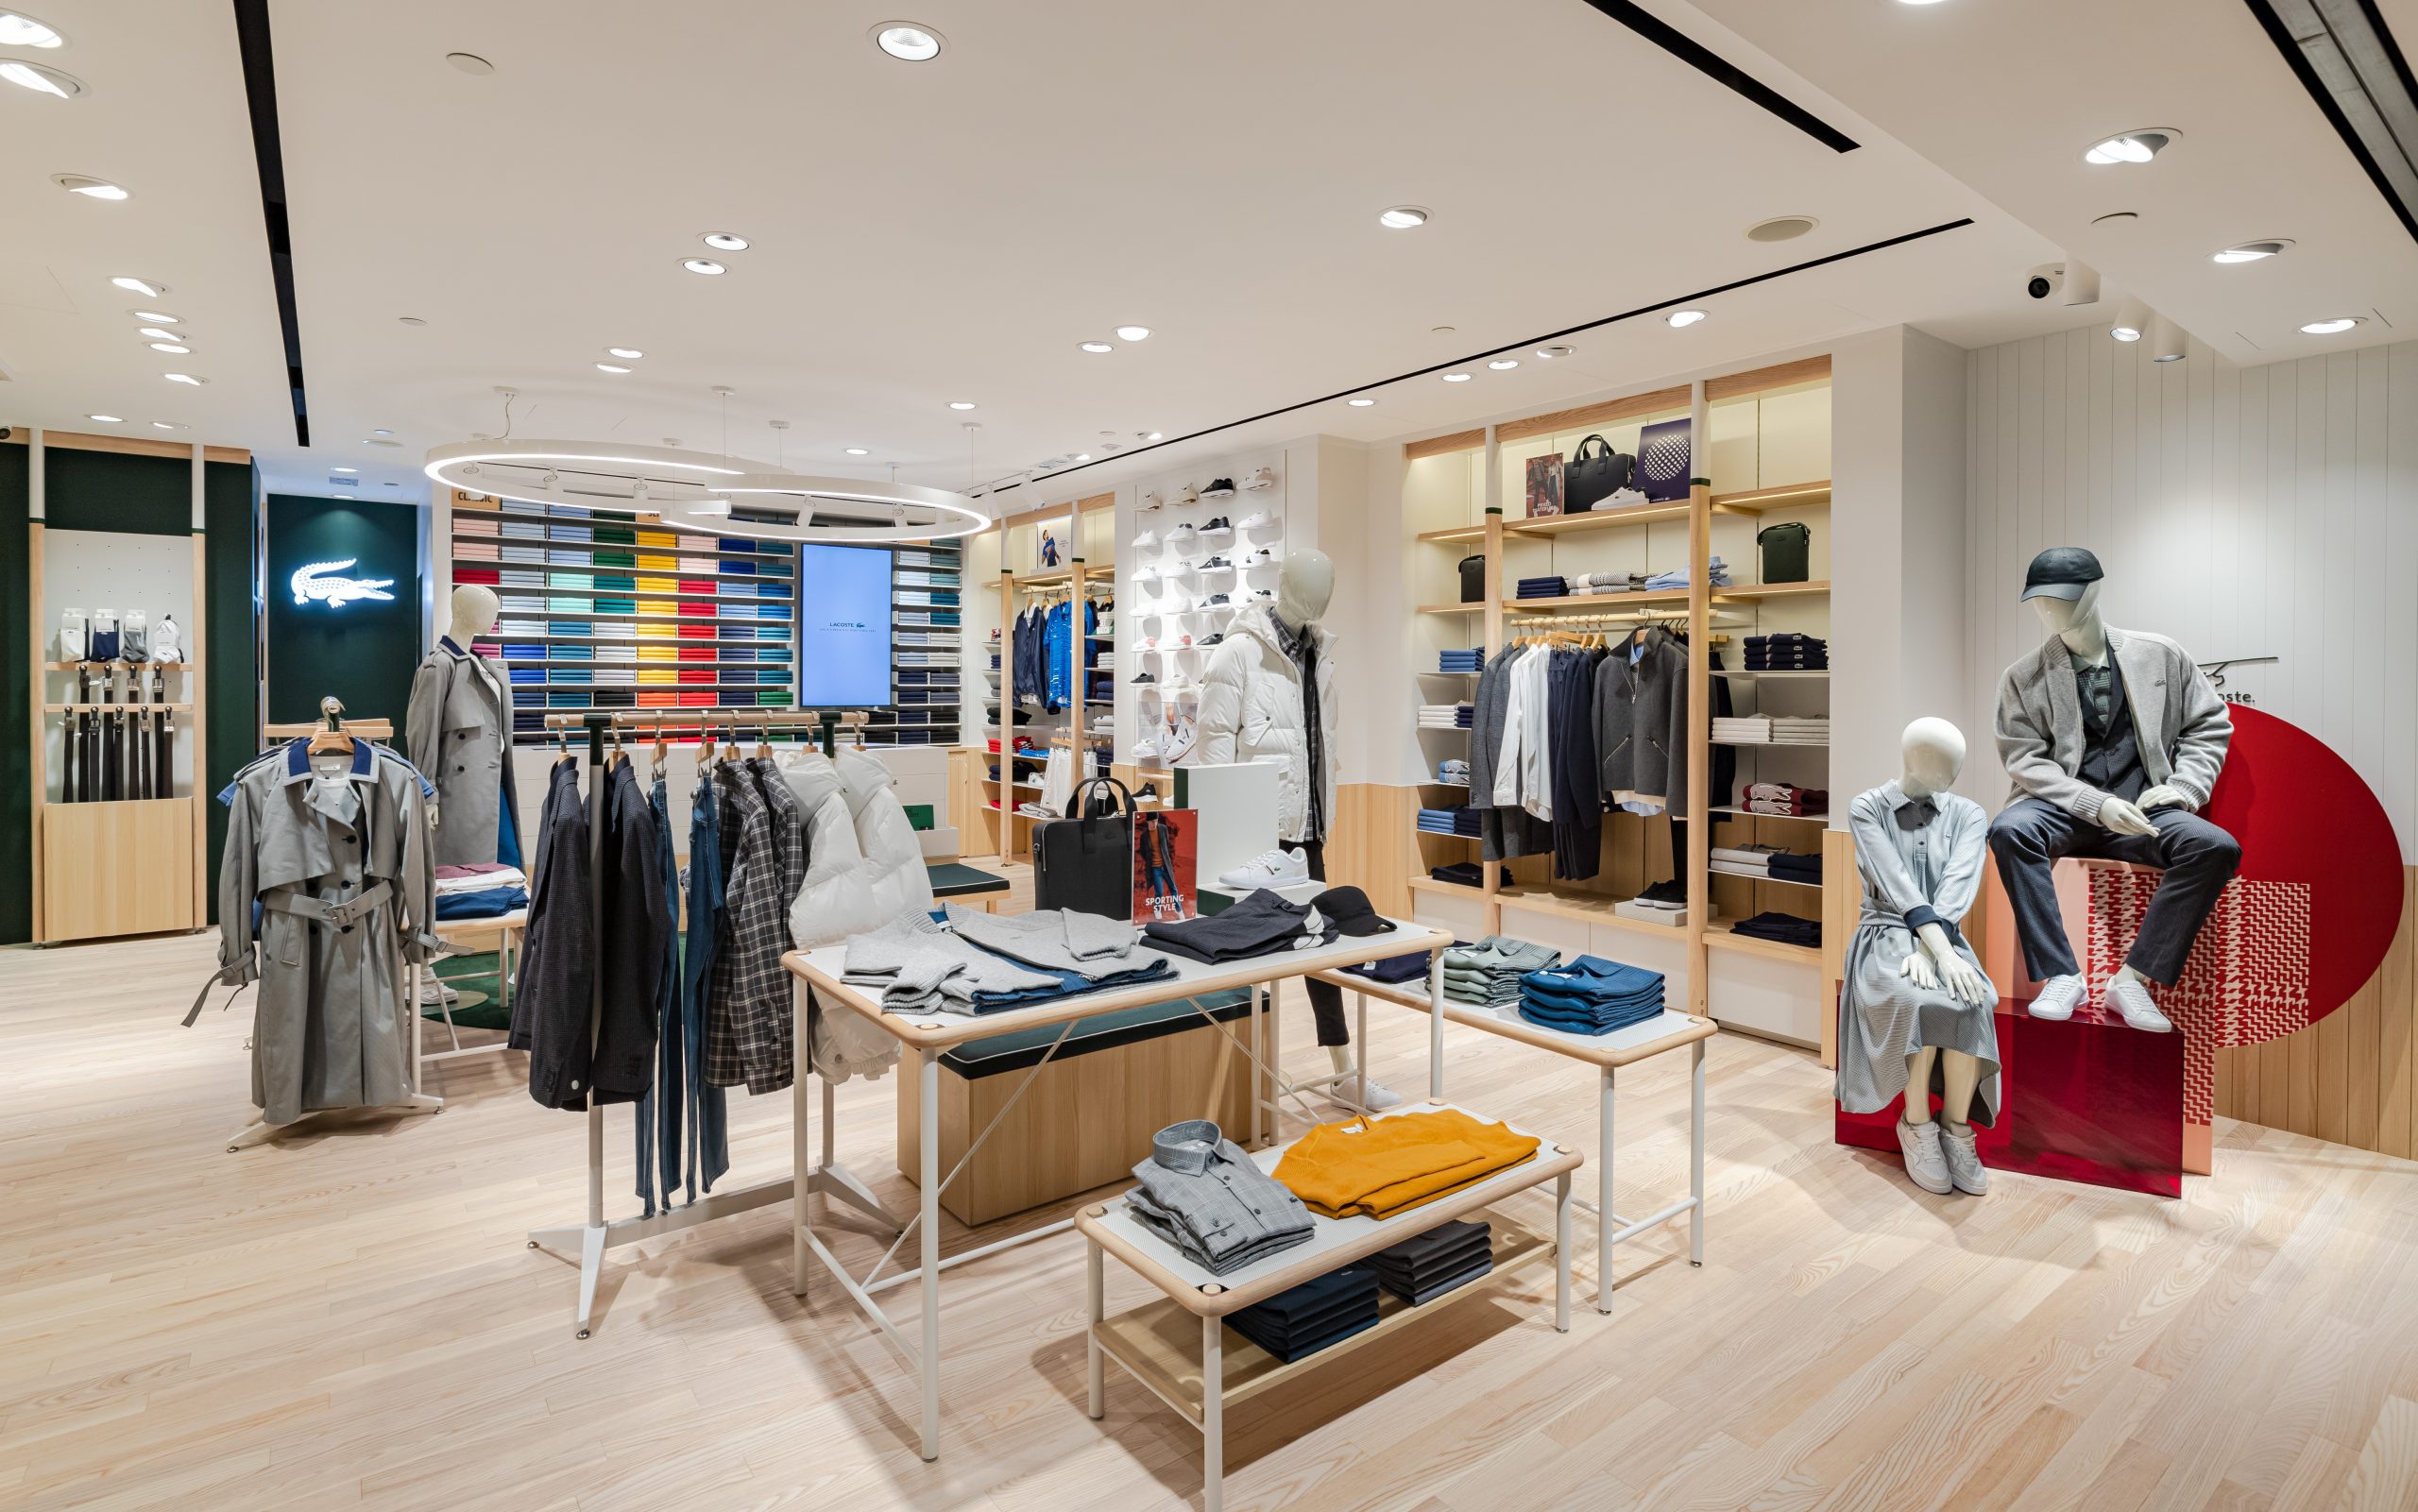 lacoste hong kong outlet